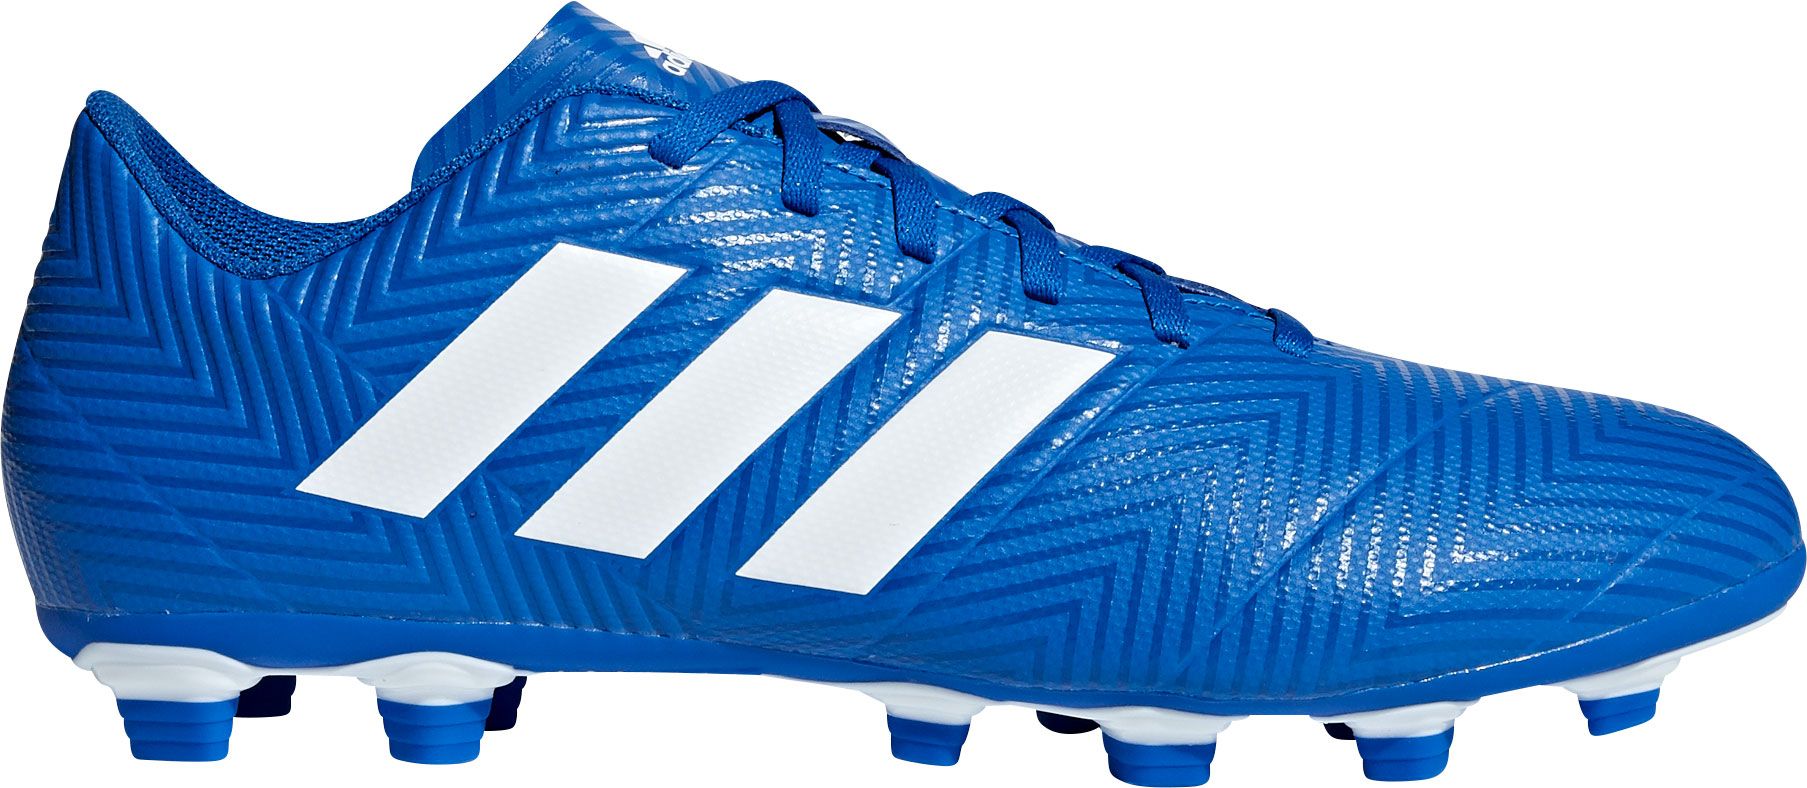 adidas glitch boots for sale